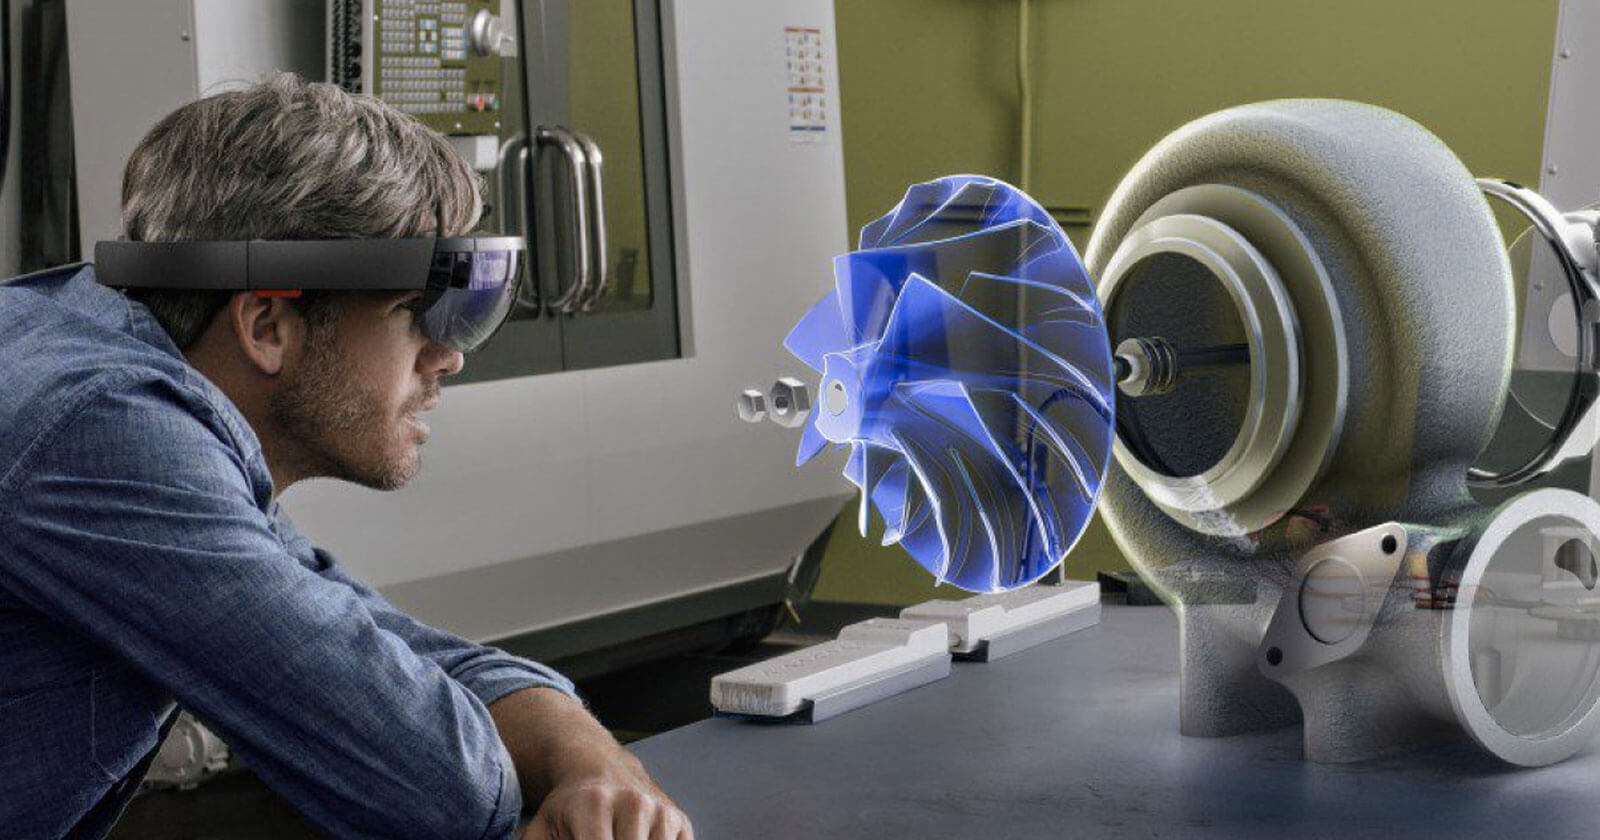 What Life Cycle Is HoloLens In